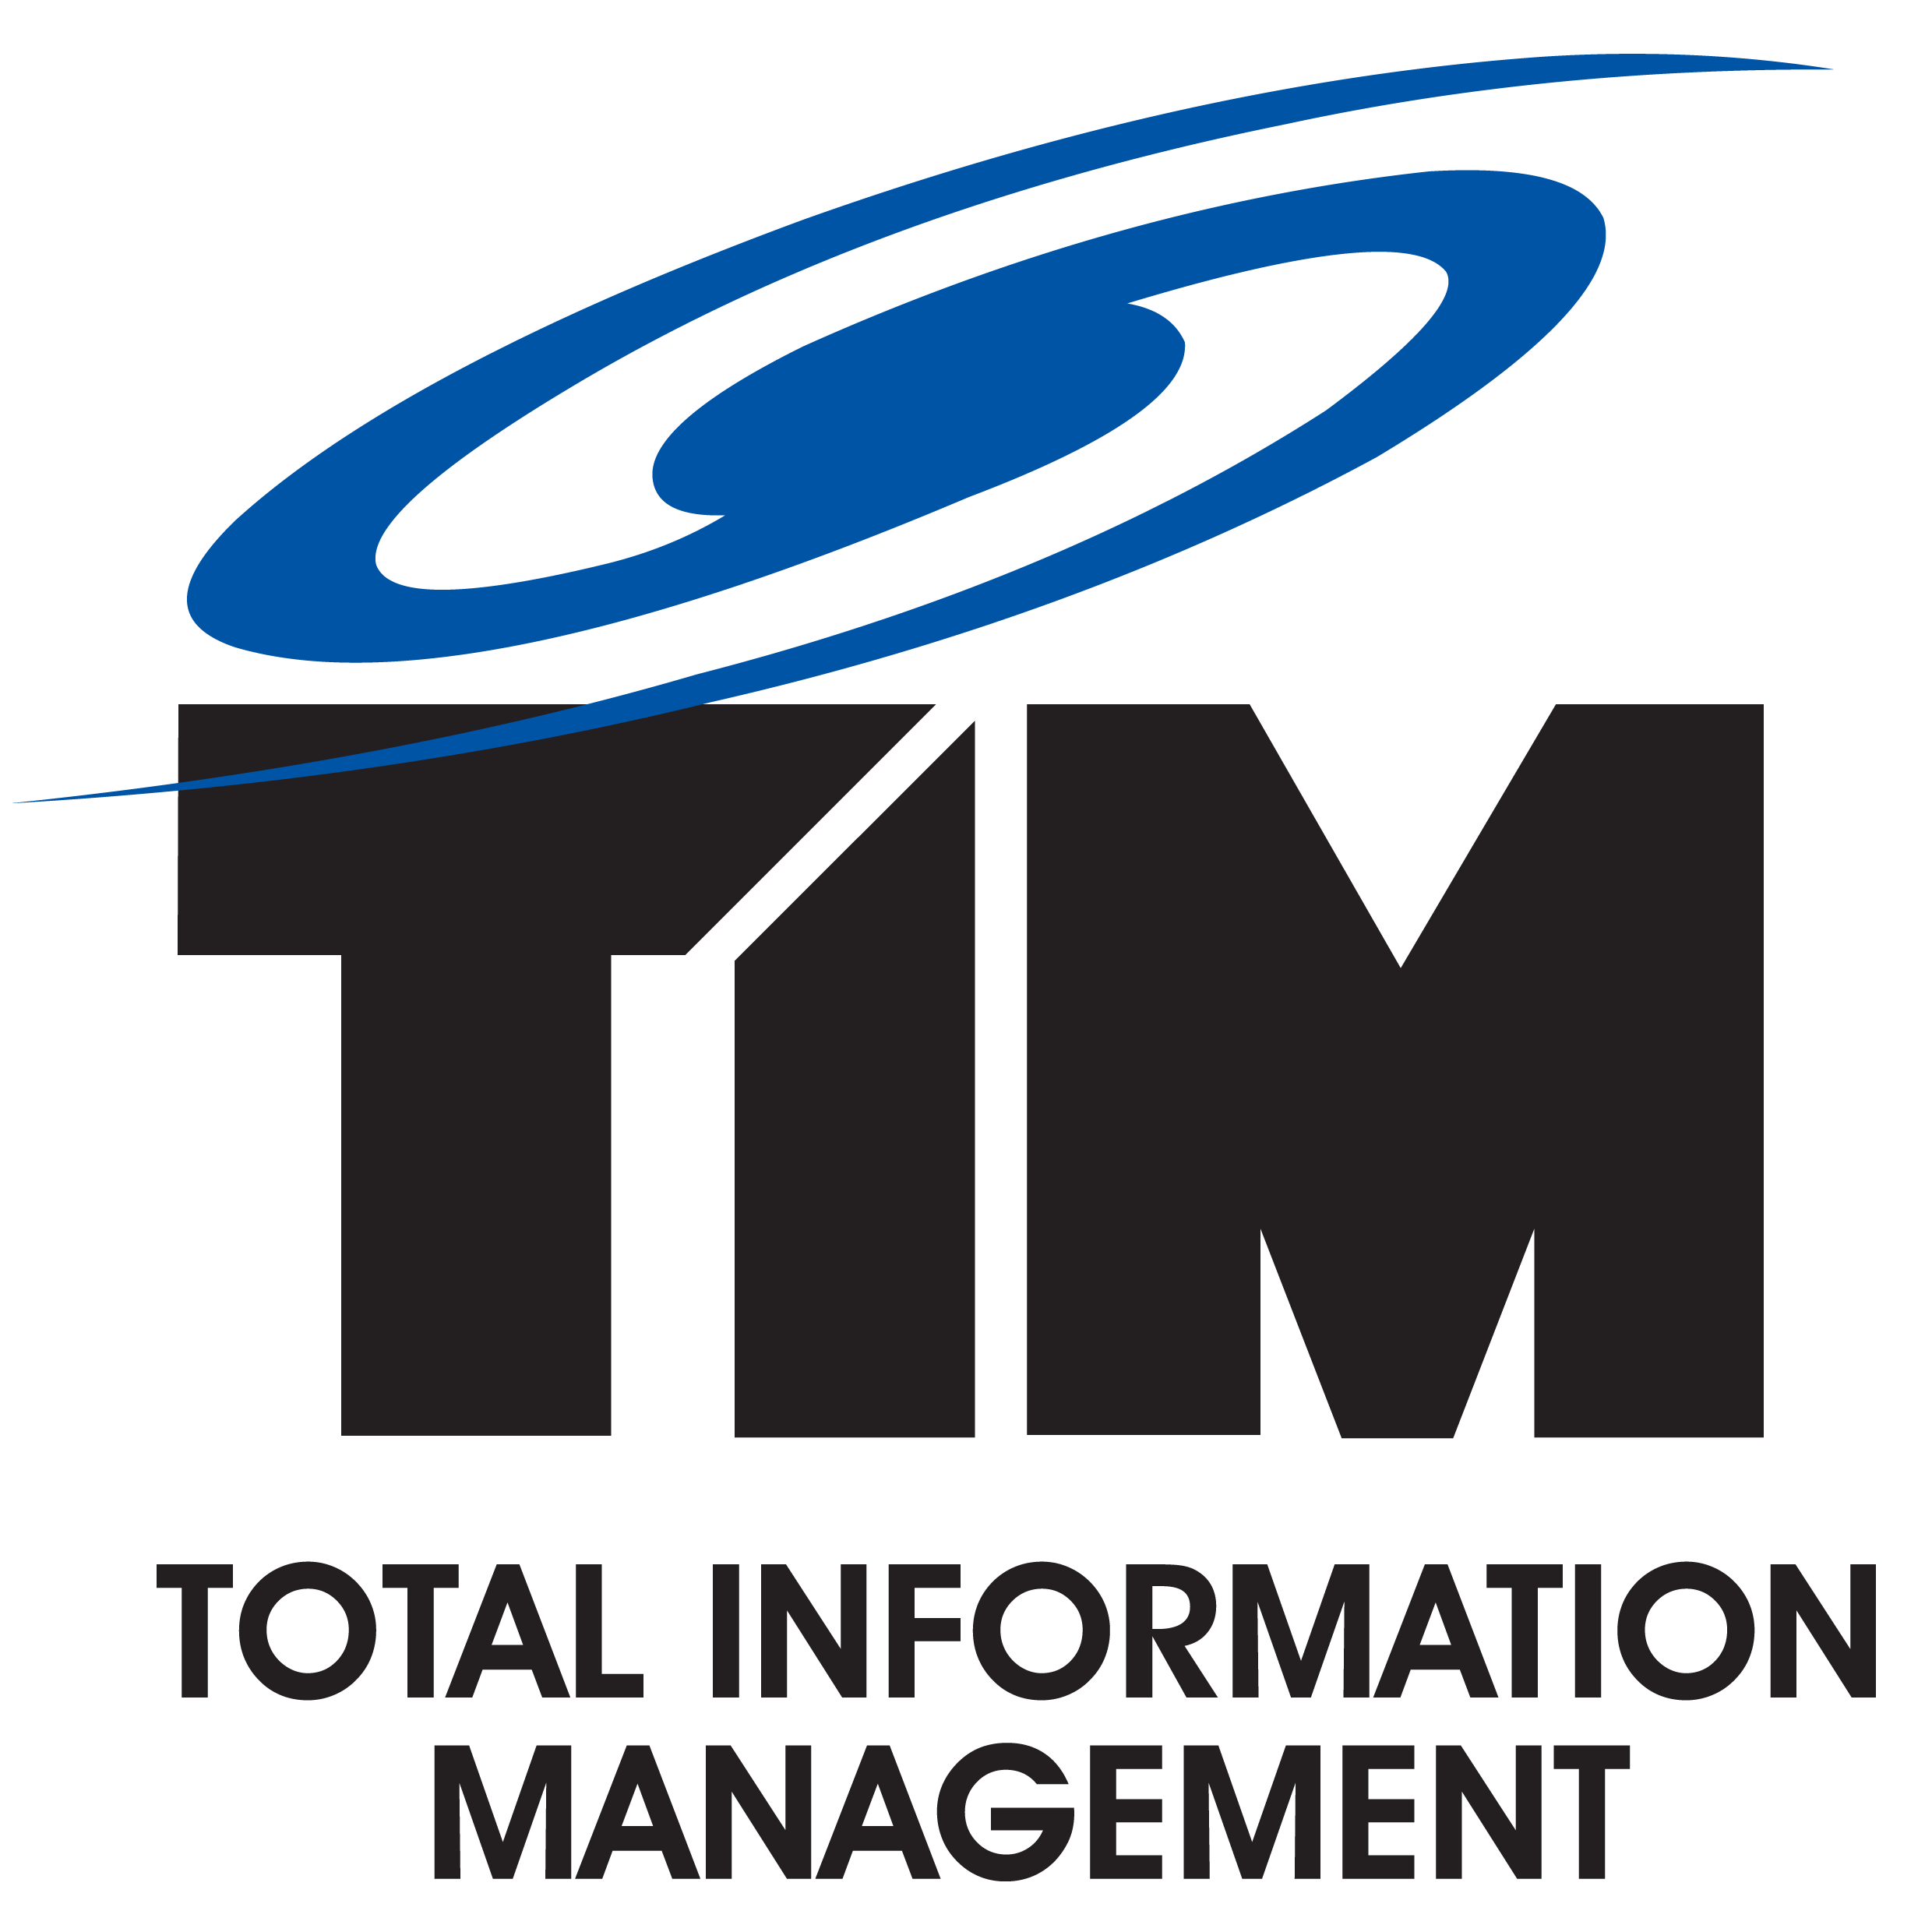 Total Information Management Corp.